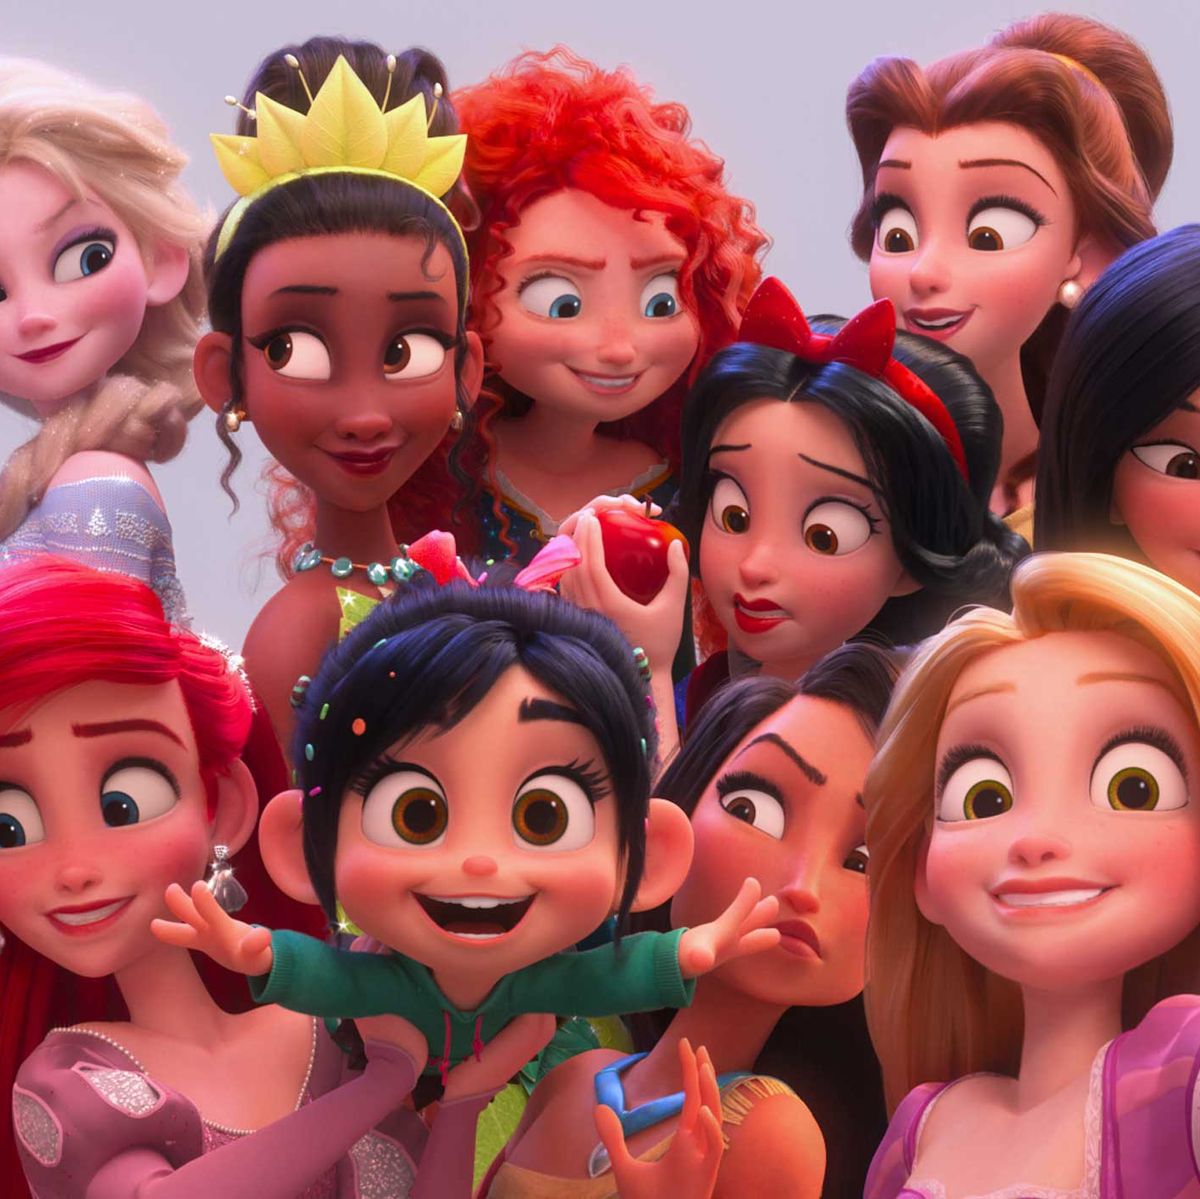 Disney Princess deluxe doll sets on sale right now - how to buy